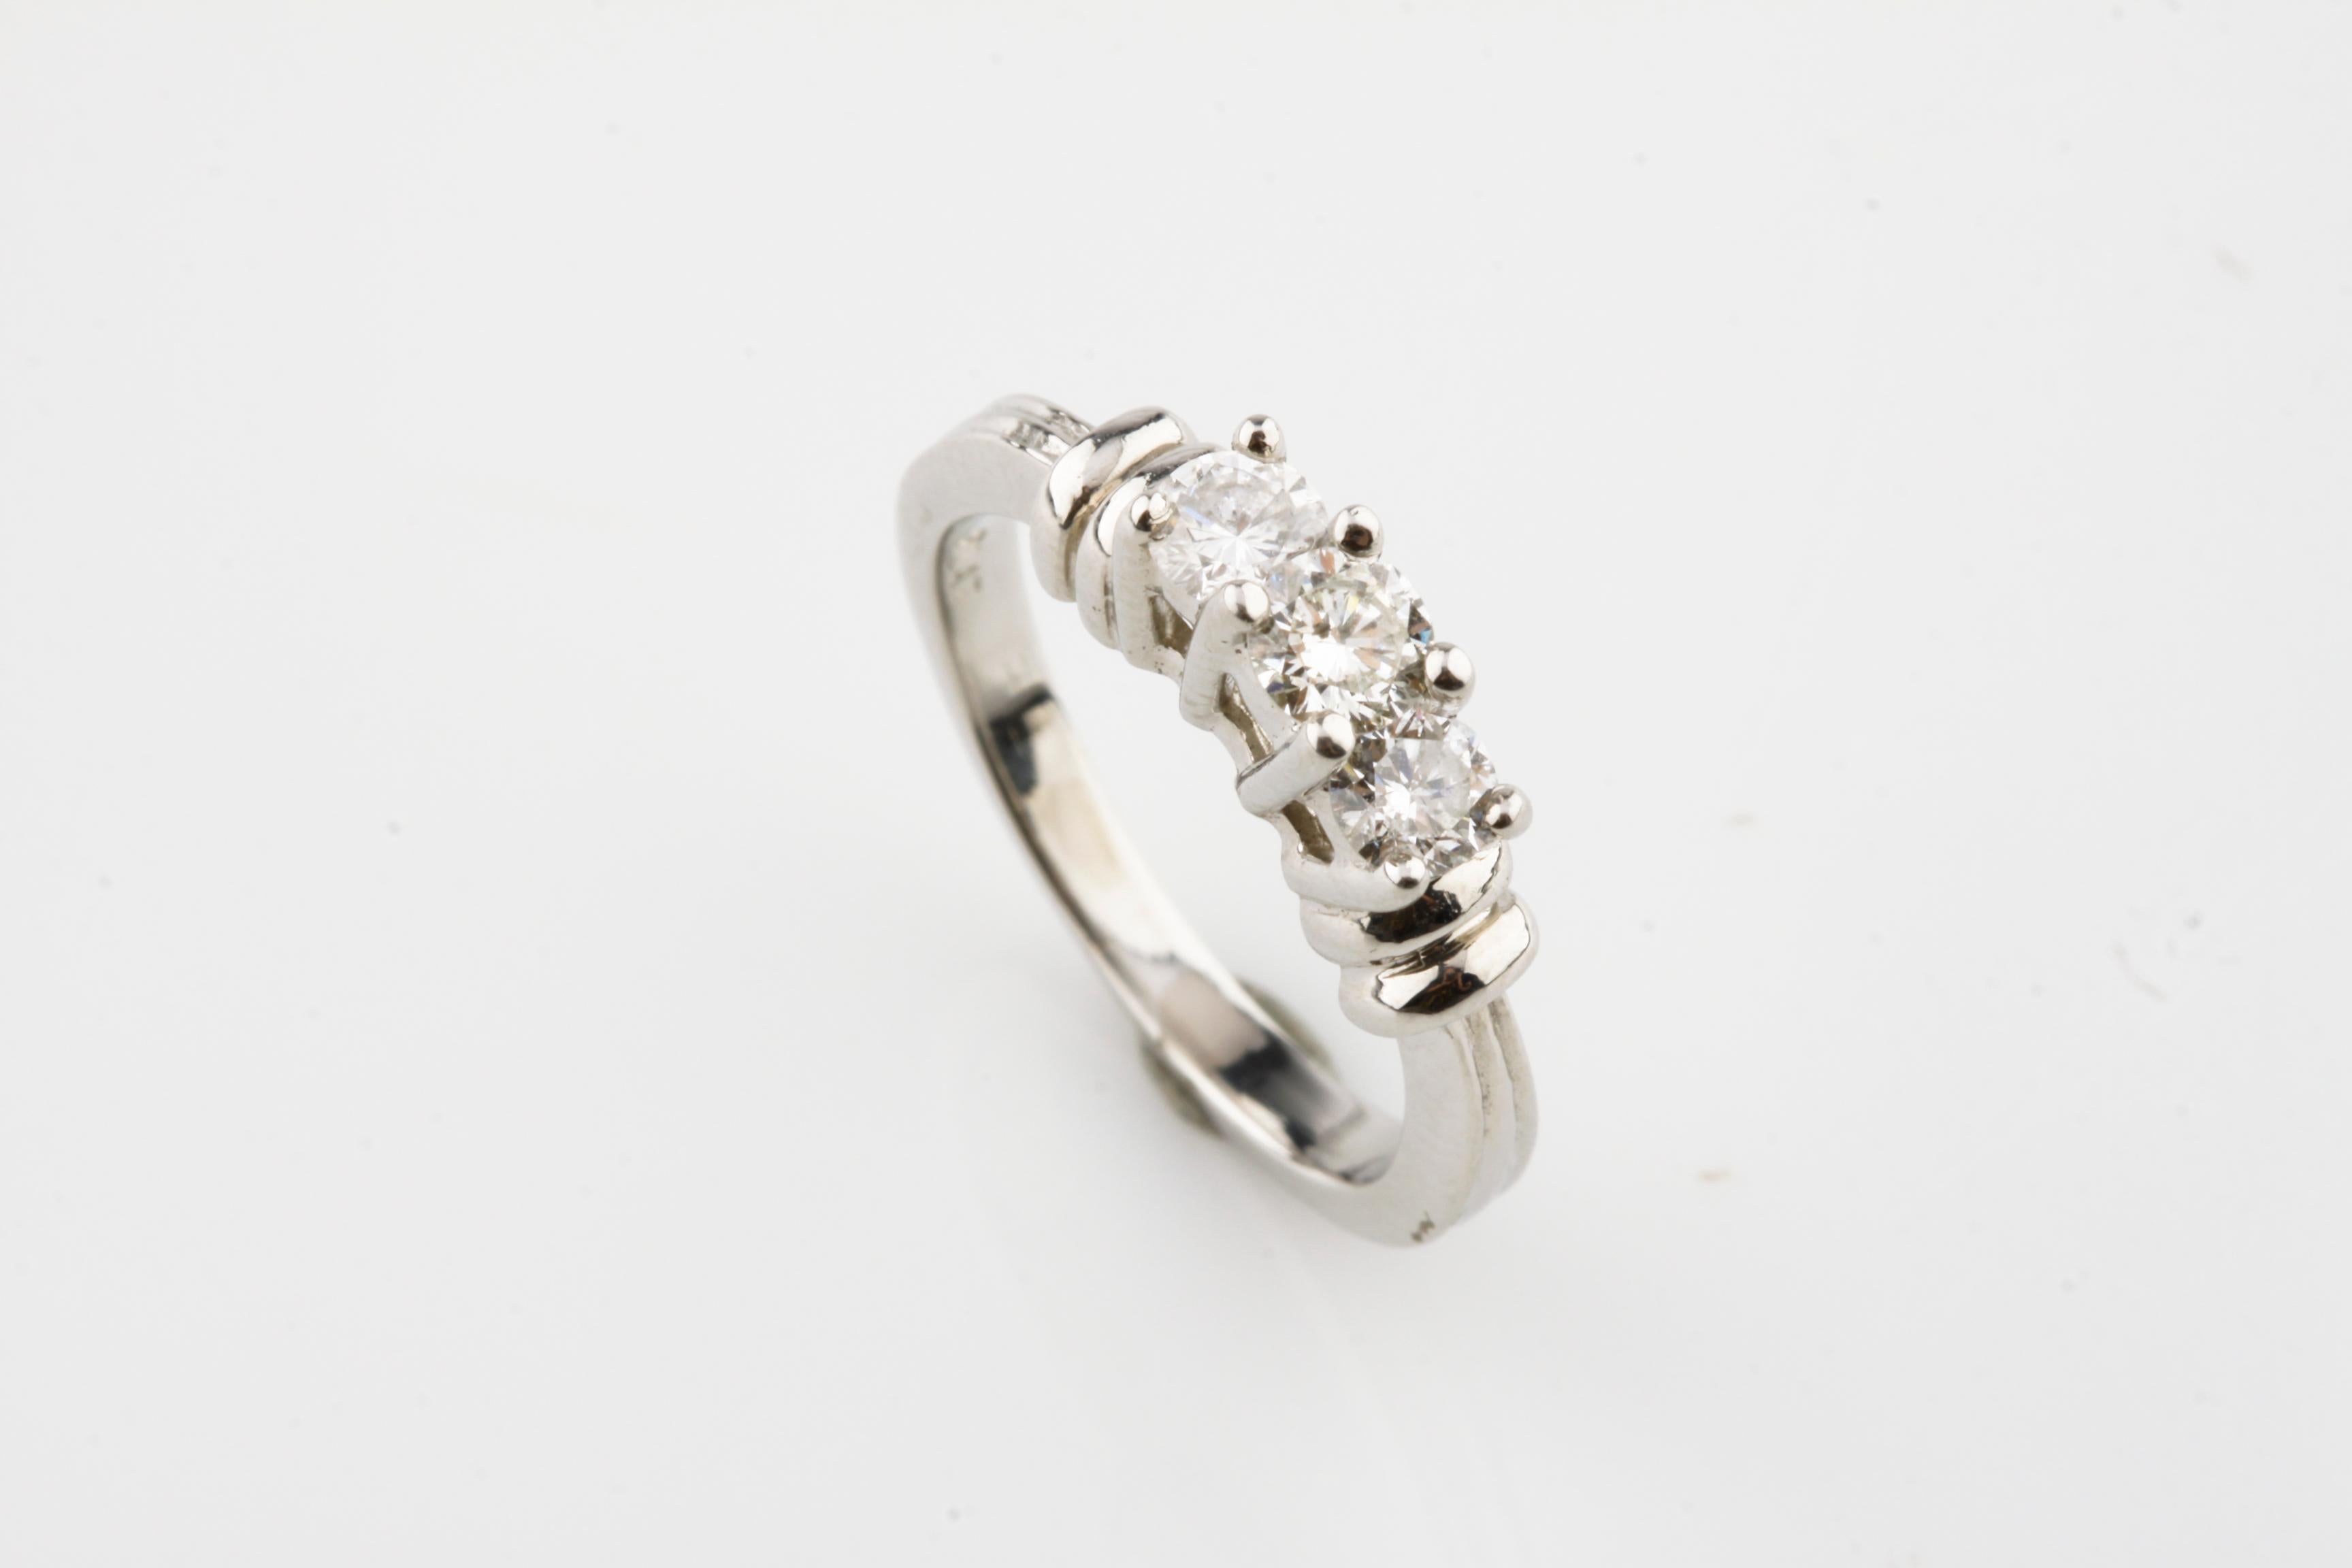 Gorgeous Three Stone Ring
Total Diamond Weight = 0.40 ct
Size 3.75
Total Mass = 5.0 grams